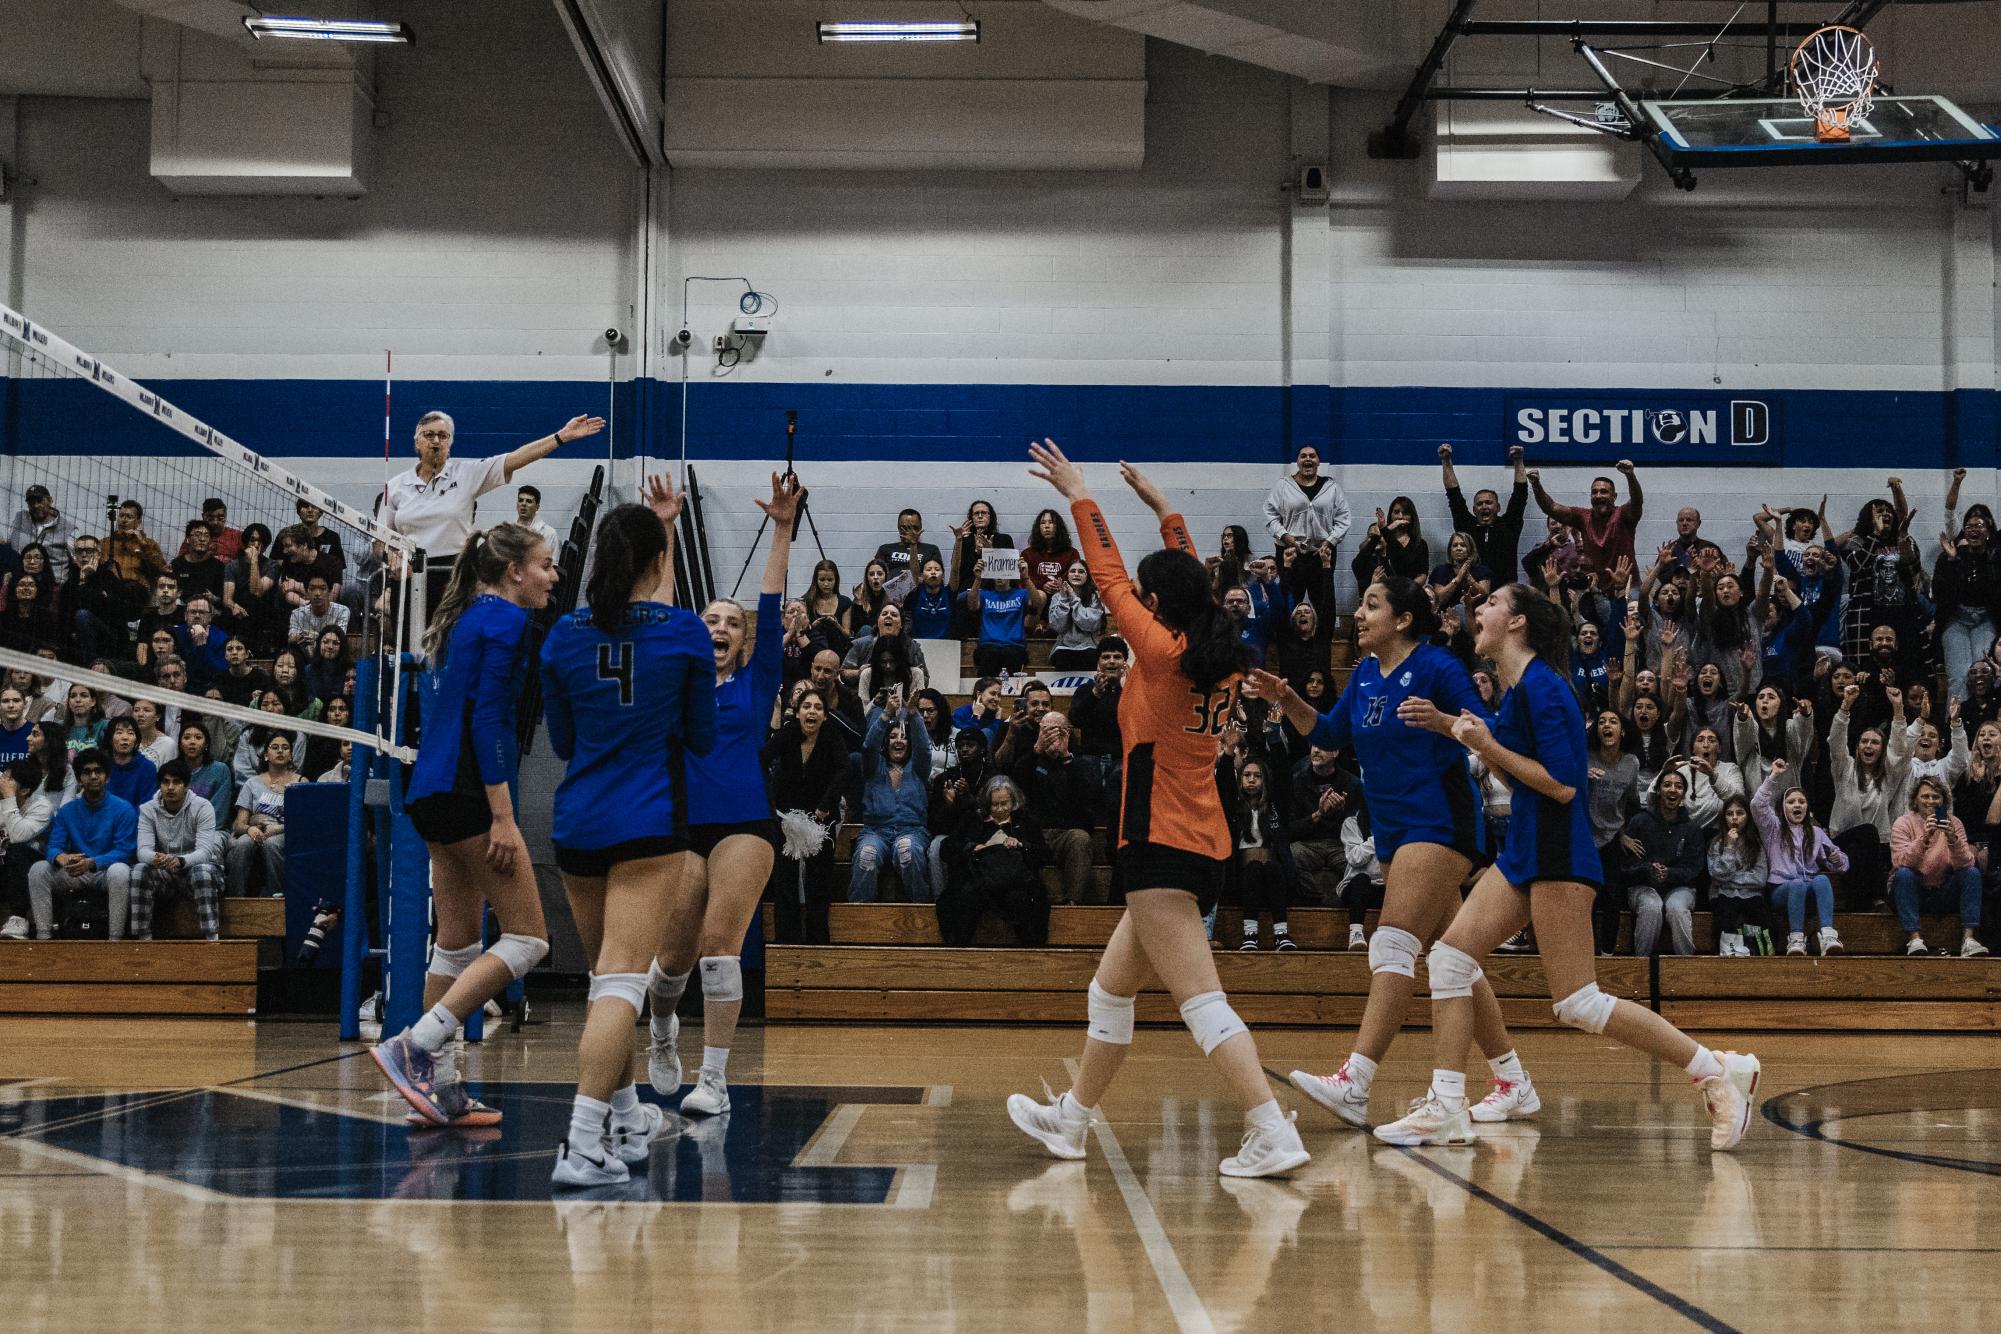 The Raiders celebrate after winning a point off of a Danielle Kramer block. The SPF Girls Volleyball team lost 2-1 (13-25, 25-22, 18-25) to the Millburn Millers on Tuesday Nov. 6 at Millburn High School. 